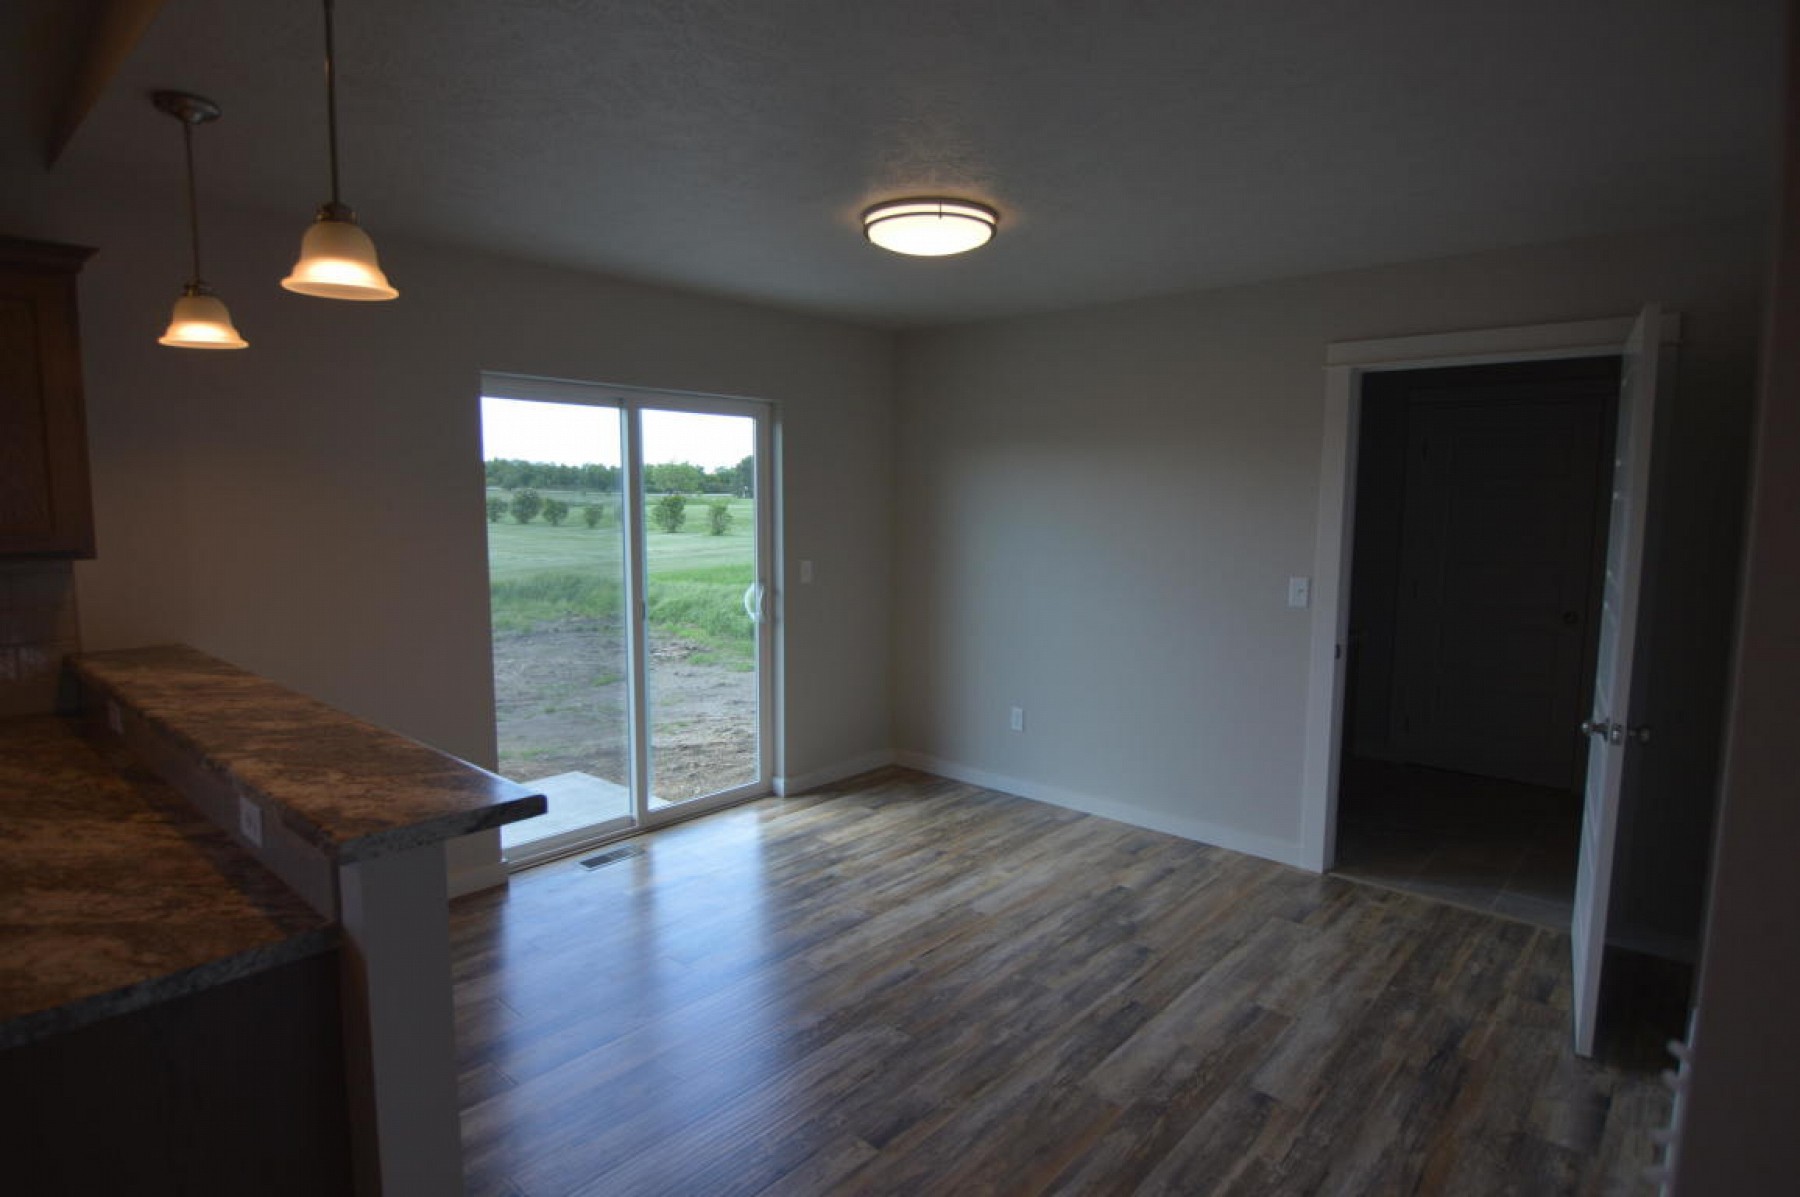 117 Golfview Drive, White, SD 57276